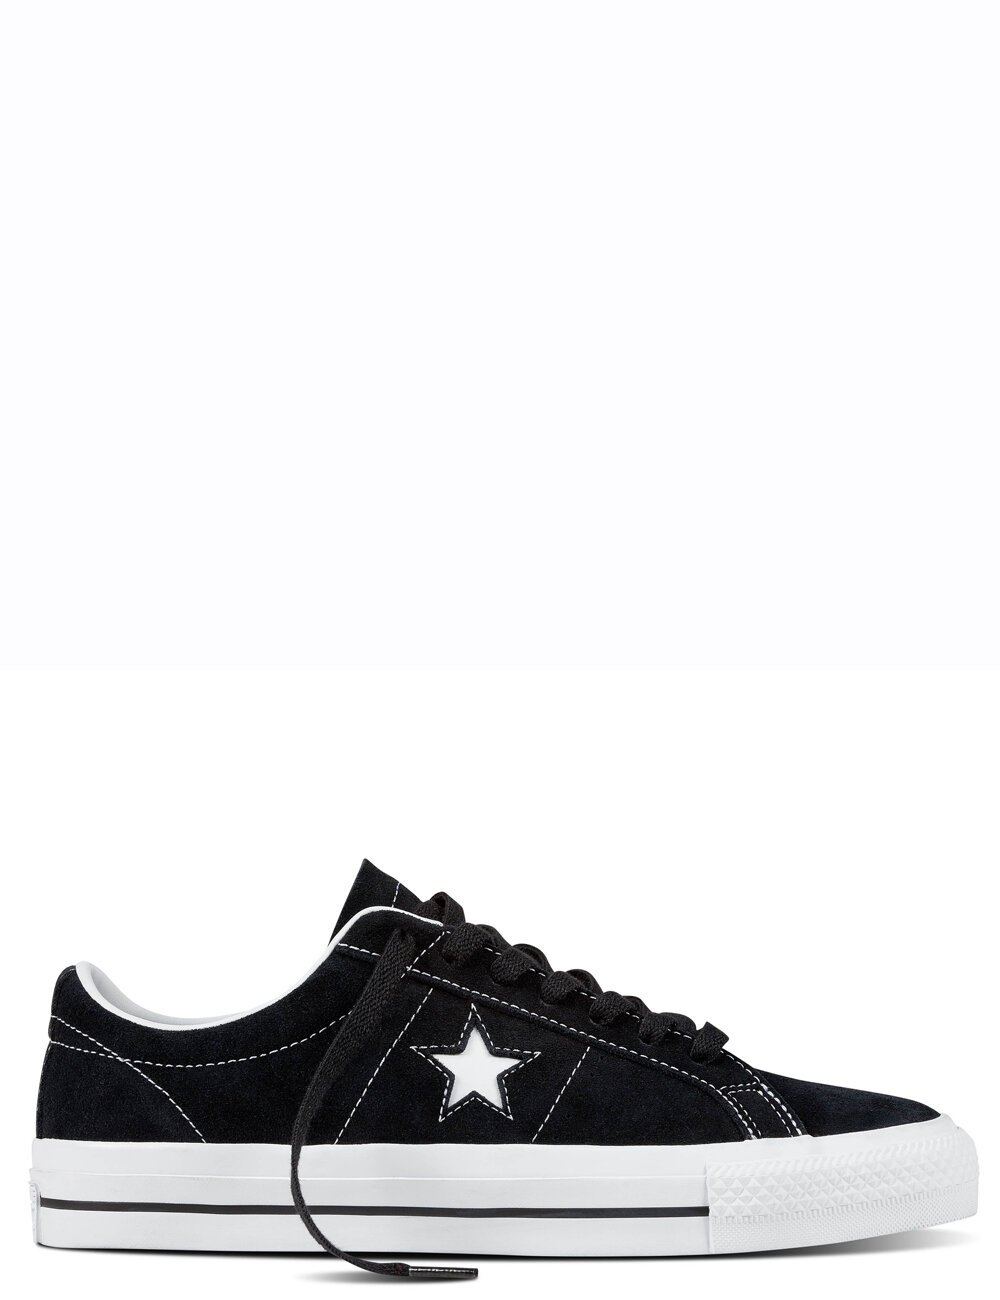 ONE STAR PRO LOW SUEDE - BLACK WHITE 